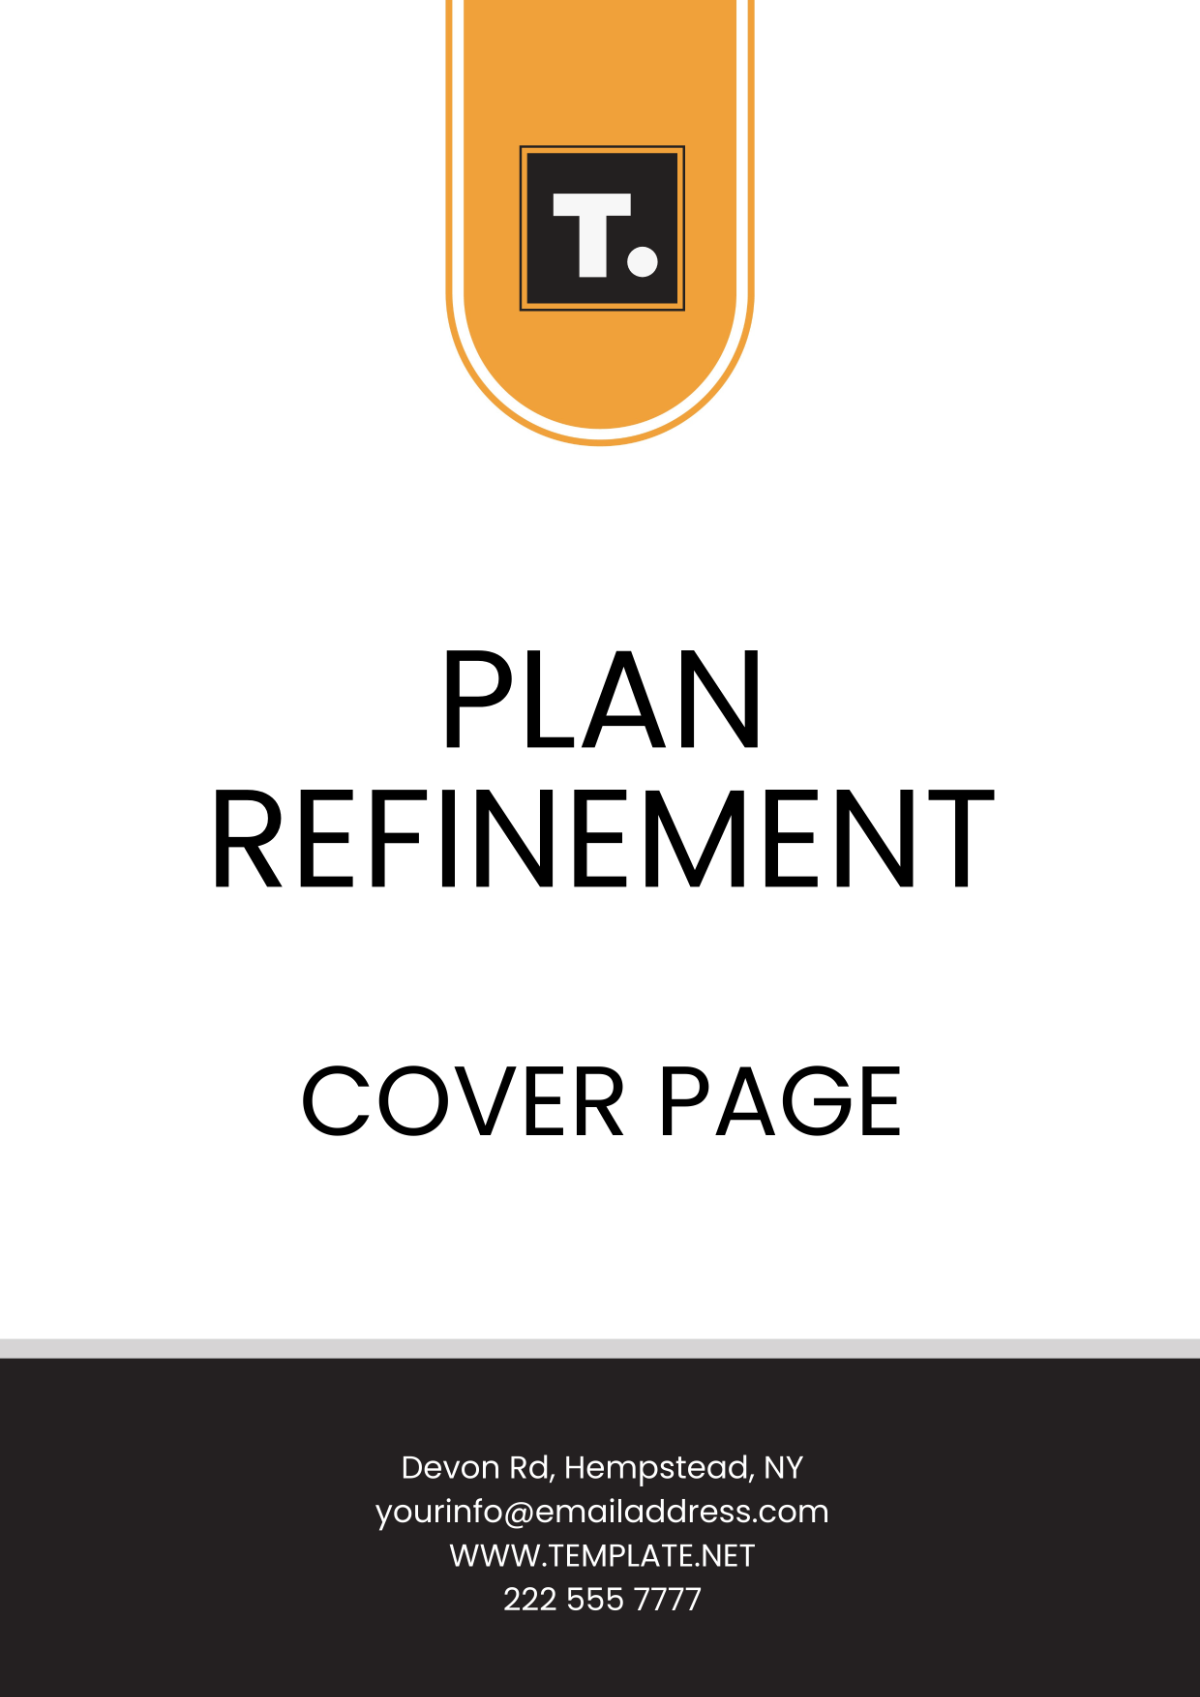 Plan Refinement Cover Page